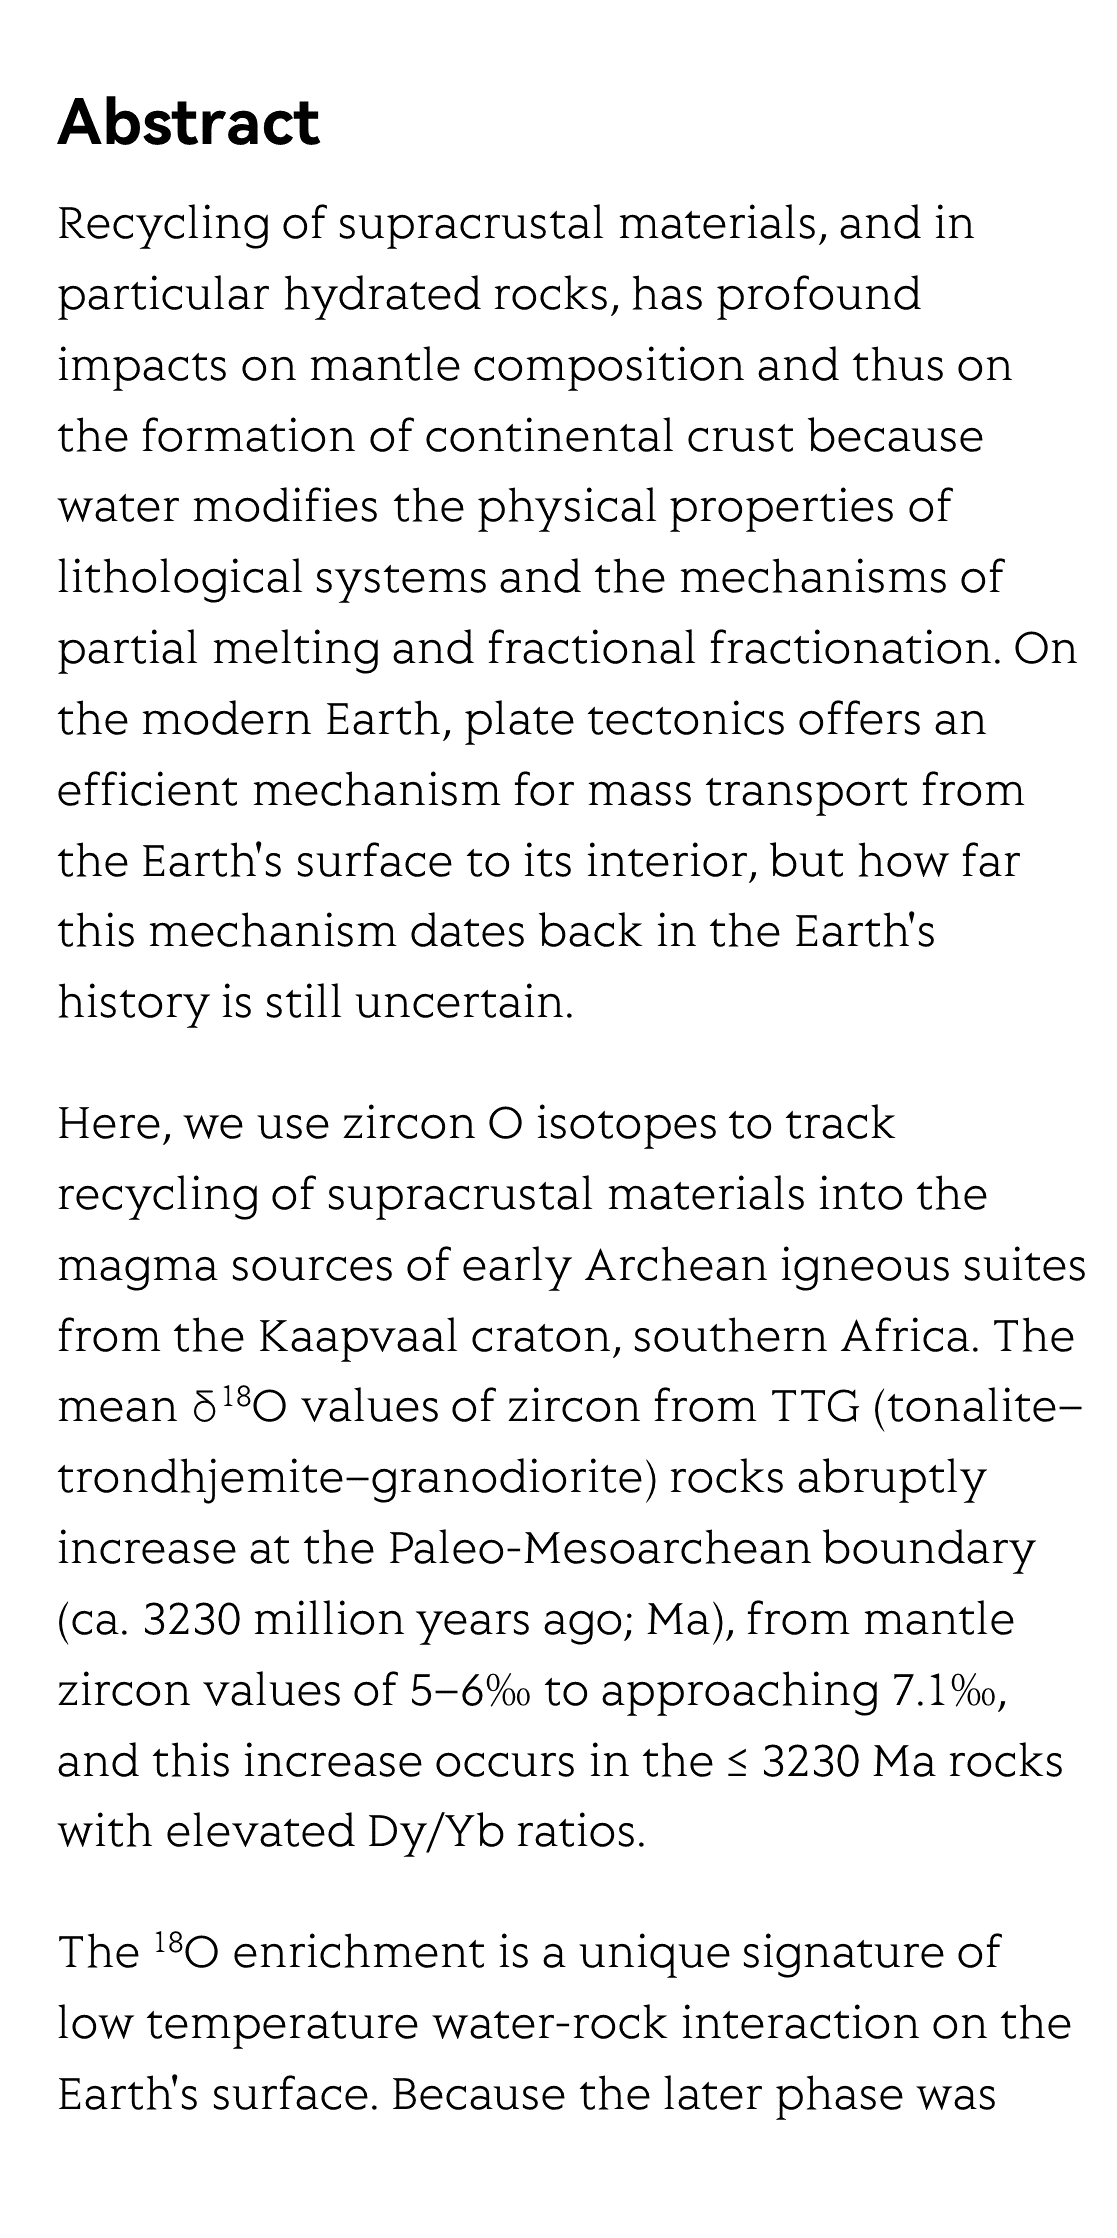 The onset of deep recycling of supracrustal materials at the Paleo-Mesoarchean boundary_2